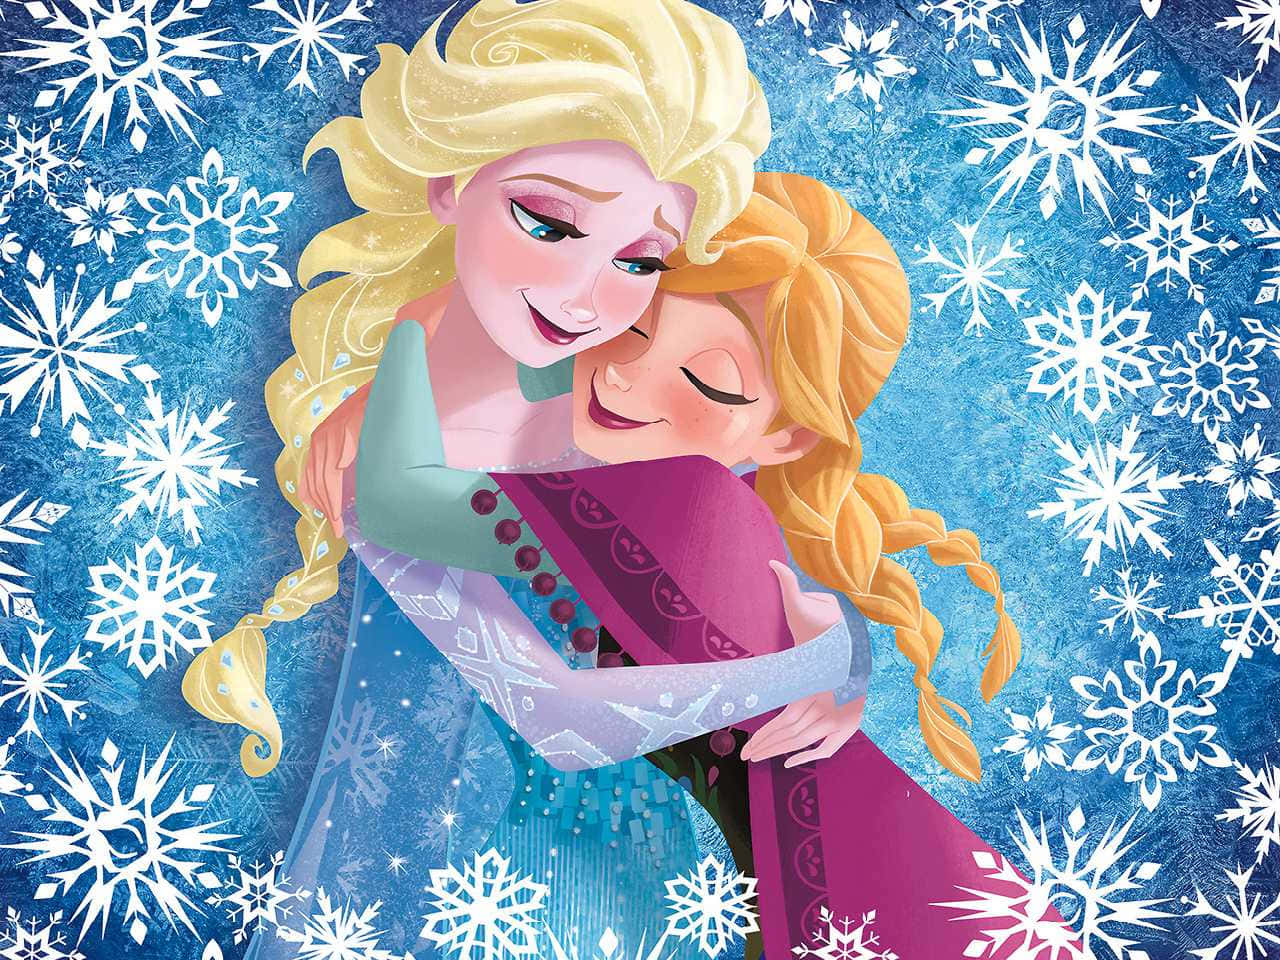 Sisters united, Elsa and Anna come together to brave the winter chill.